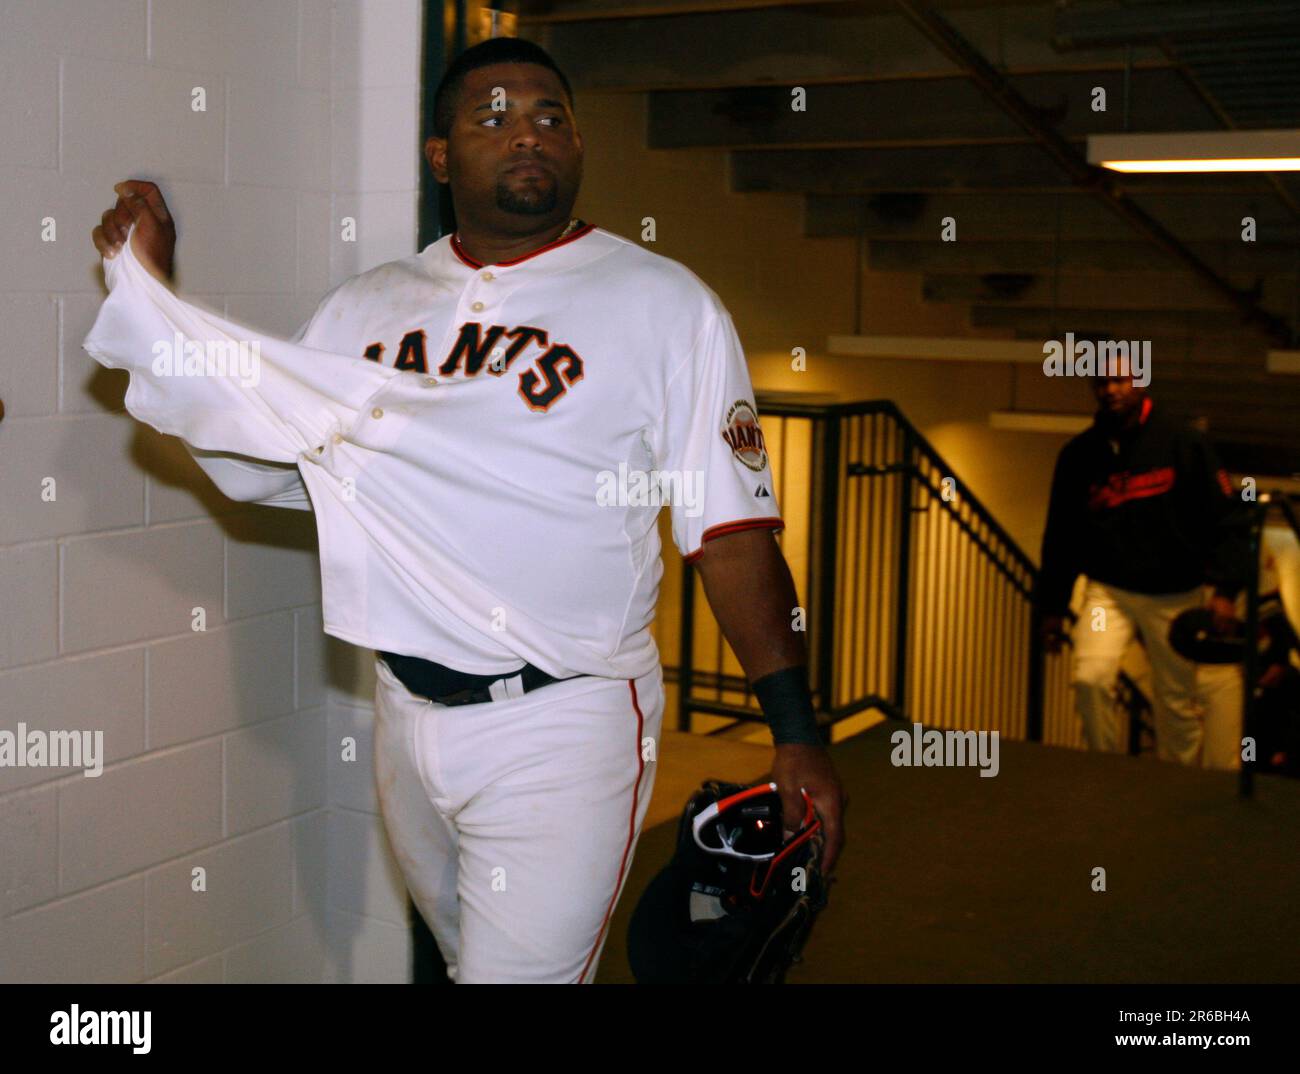 Pablo Sandoval removes his jersey as he enters the clubhouse after the San  Francisco Giants' 4-2 loss to the San Diego Padres at AT&T Park on  Saturday. (Paul Chinn/San Francisco Chronicle via